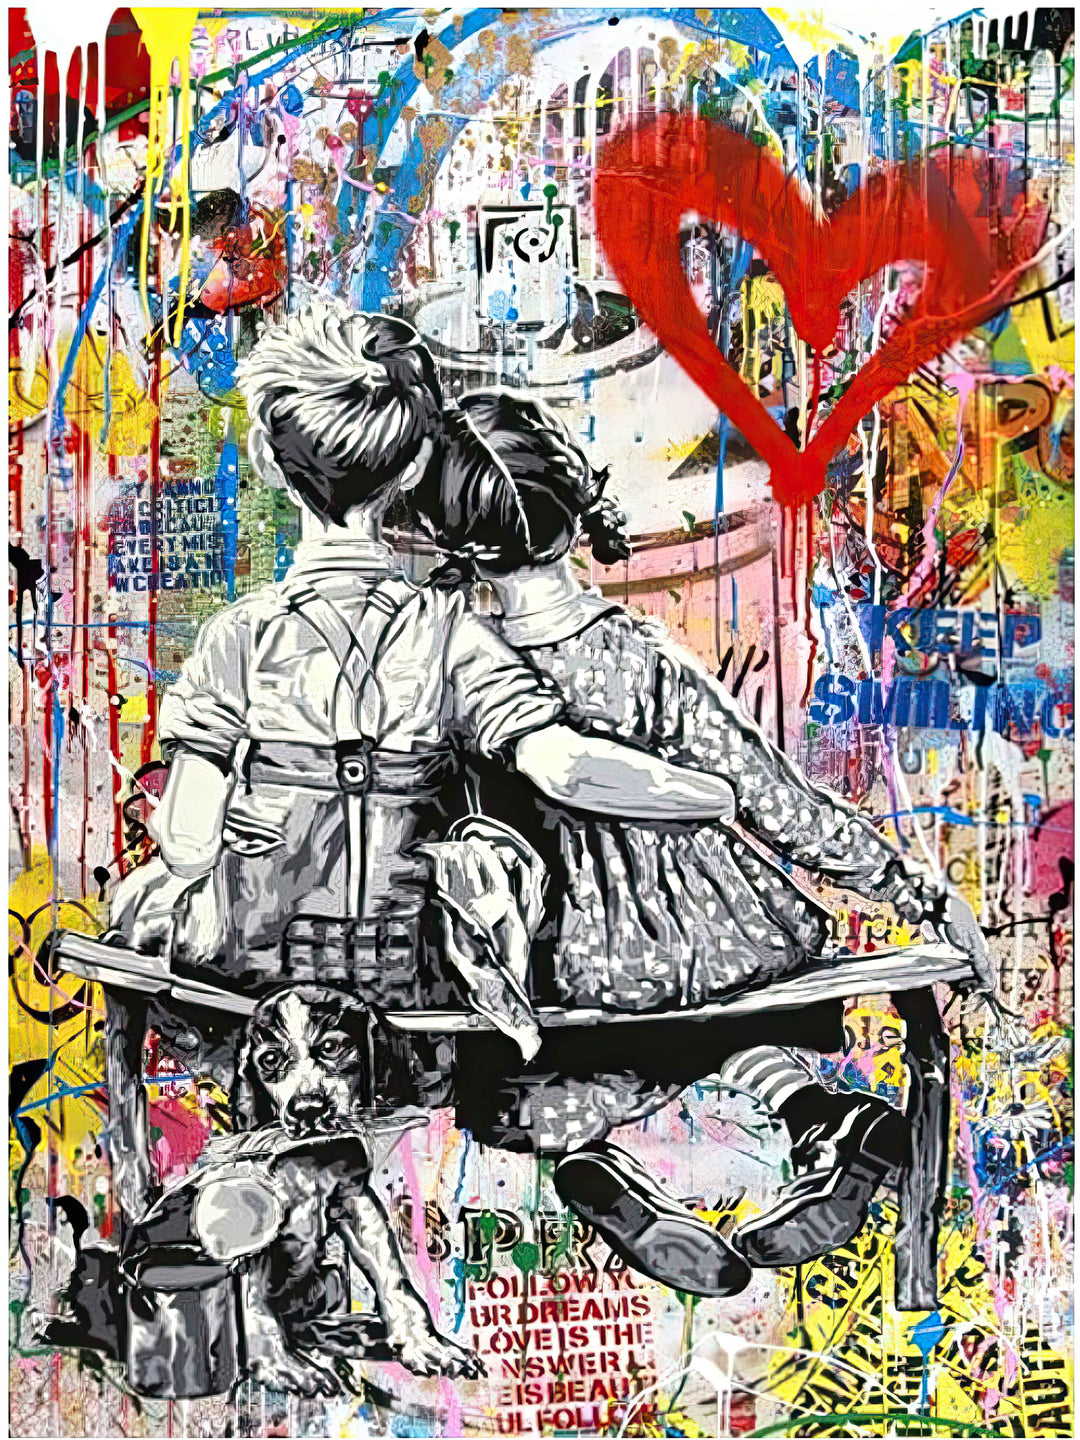 Banksy: Cuddles On The Bench - Wrapped Canvas Print, Modern Art, Art, Art, Collectibile Memorabilia, AAAPA33105